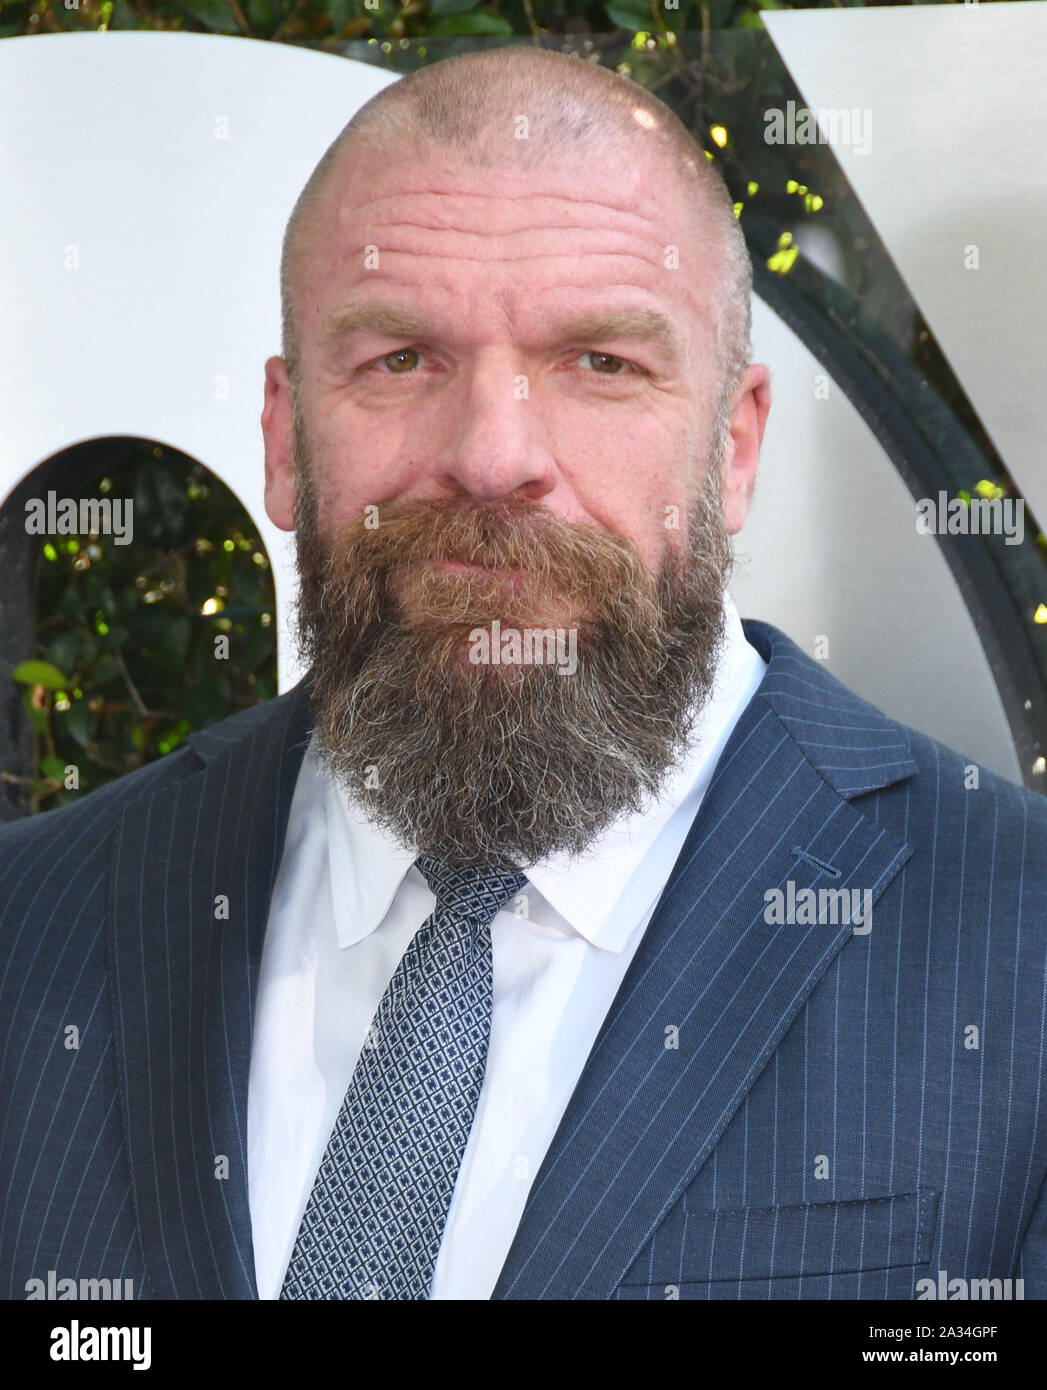 October 4, 2019, Los Angeles, California, USA: 04 October 2019 - Los Angeles, California - Paul Levesque, Triple H. WWE 20th Anniversary Celebration Marking Premiere Of WWE Friday Night SmackDown On FOX held at Staples Center. Photo Credit: Birdie Thompson/AdMedia (Credit Image: © Birdie Thompson/AdMedia via ZUMA Wire) Stock Photo